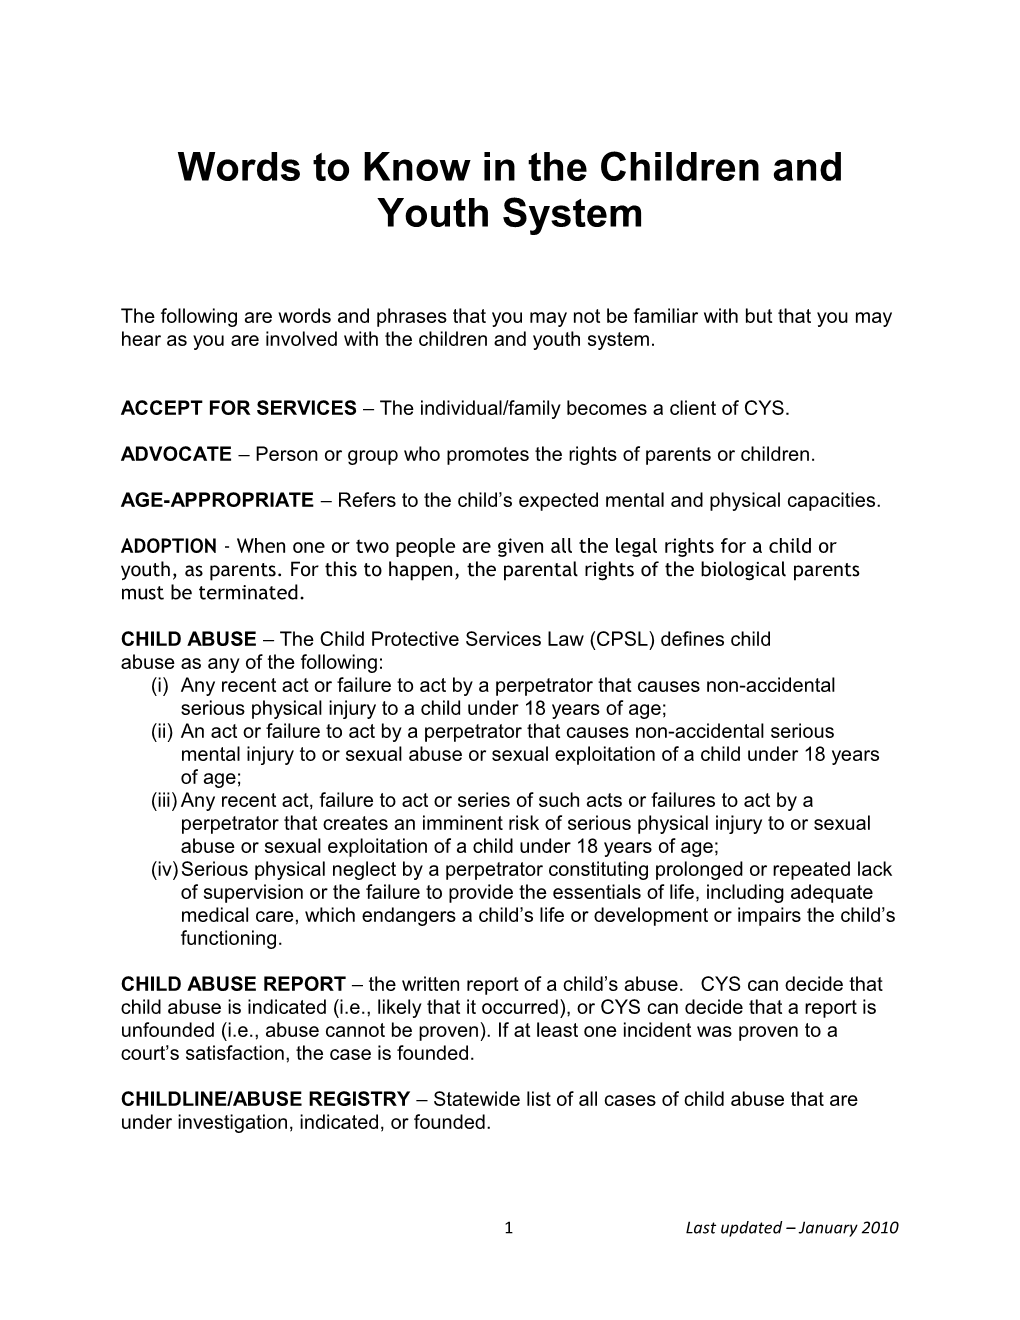 Words to Know in the Children and Youth System